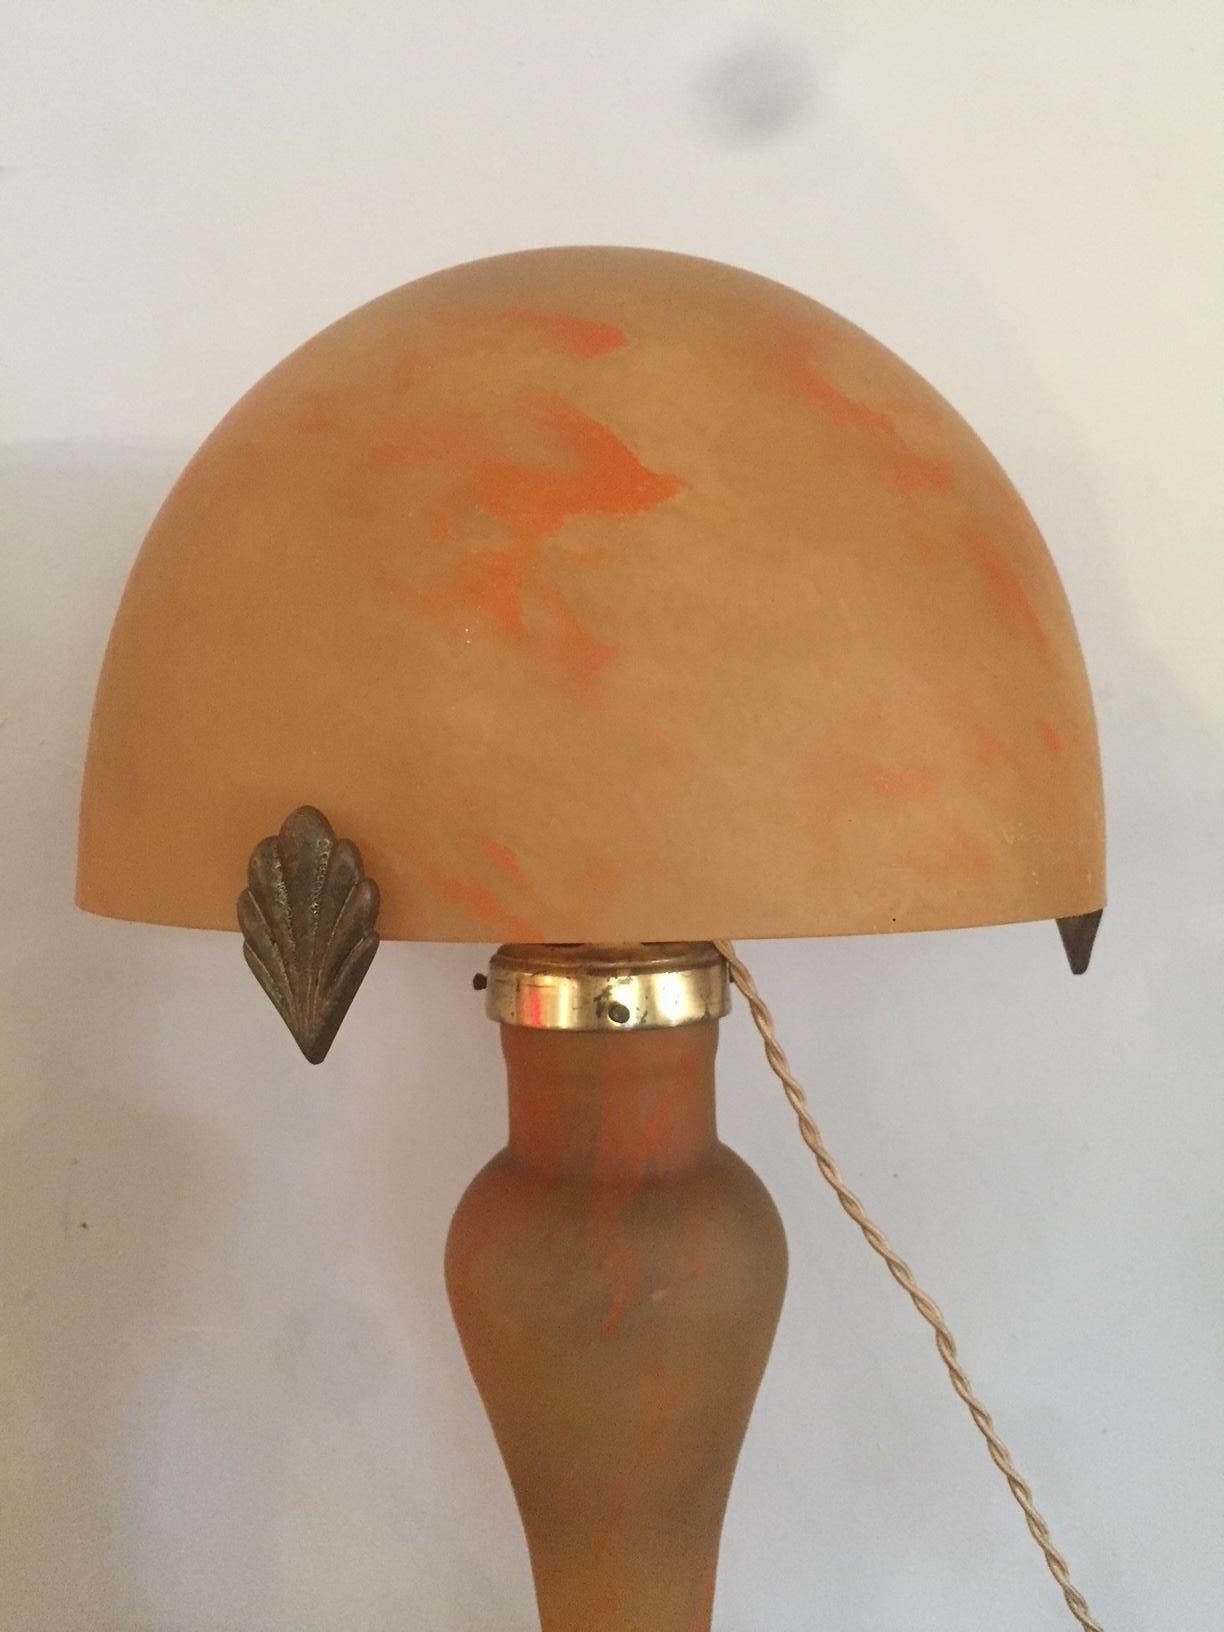 Very nice and original 20th century French orange molten glass table lamp from the 1950s signed by Vincent Garnier Paris.
Gilded brass fittings
Beautiful alight.